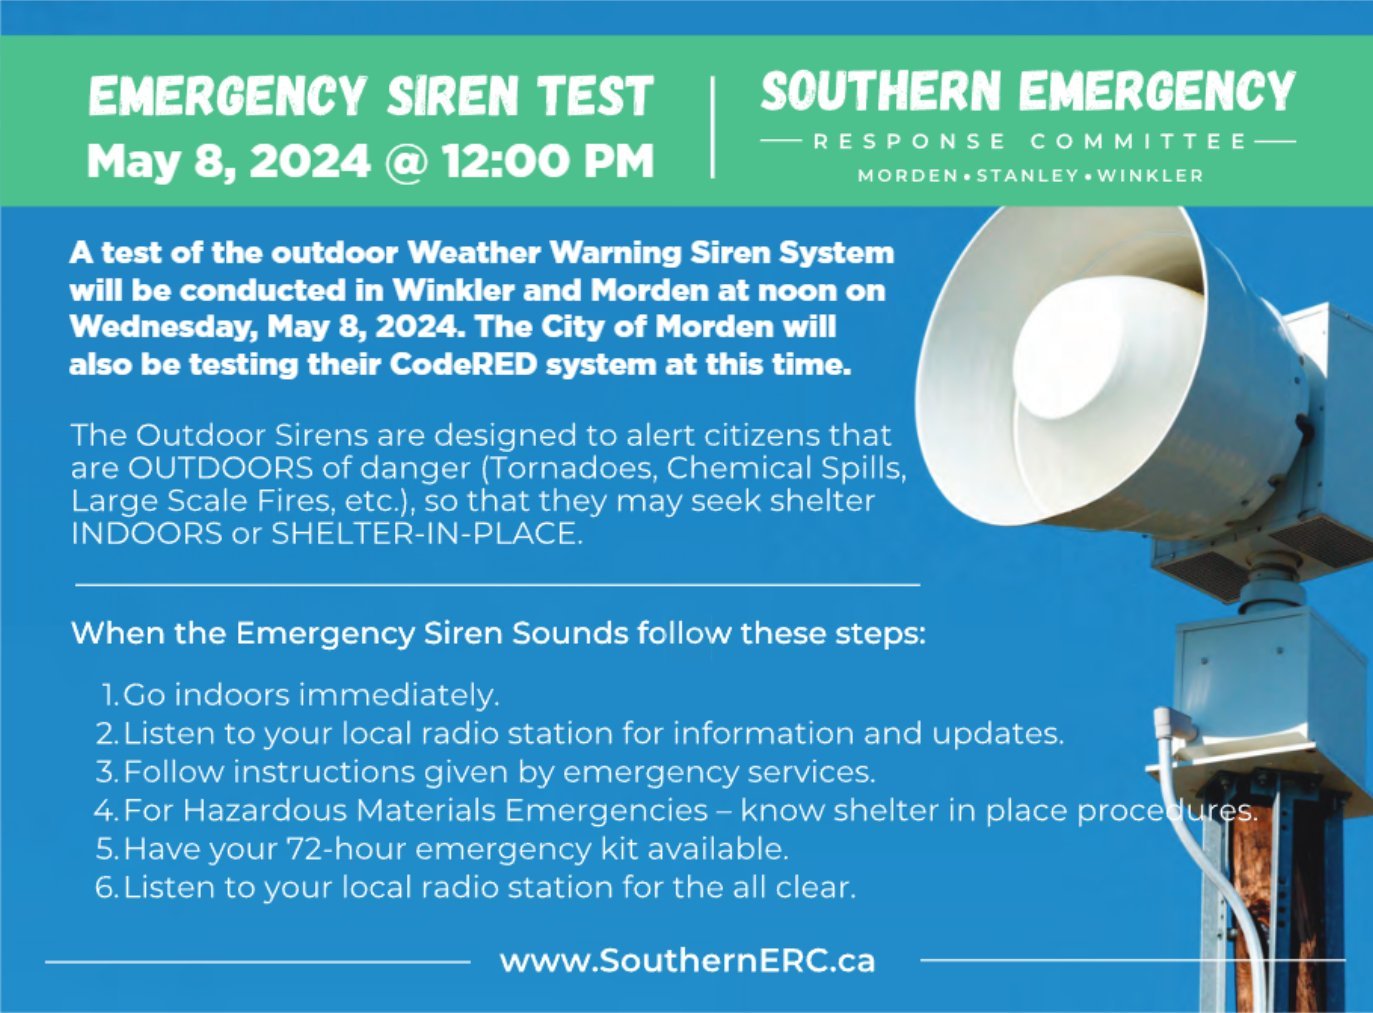 🚨 REMINDER: EMERGENCY SIREN TEST in Winkler and Morden 🚨

Mark your calendars! 📅 On May 8, 2024, at precisely 12:00 PM, the cities of Winkler and Morden will conduct a crucial TEST of the outdoor Weather Warning Siren System, alongside the Morden 